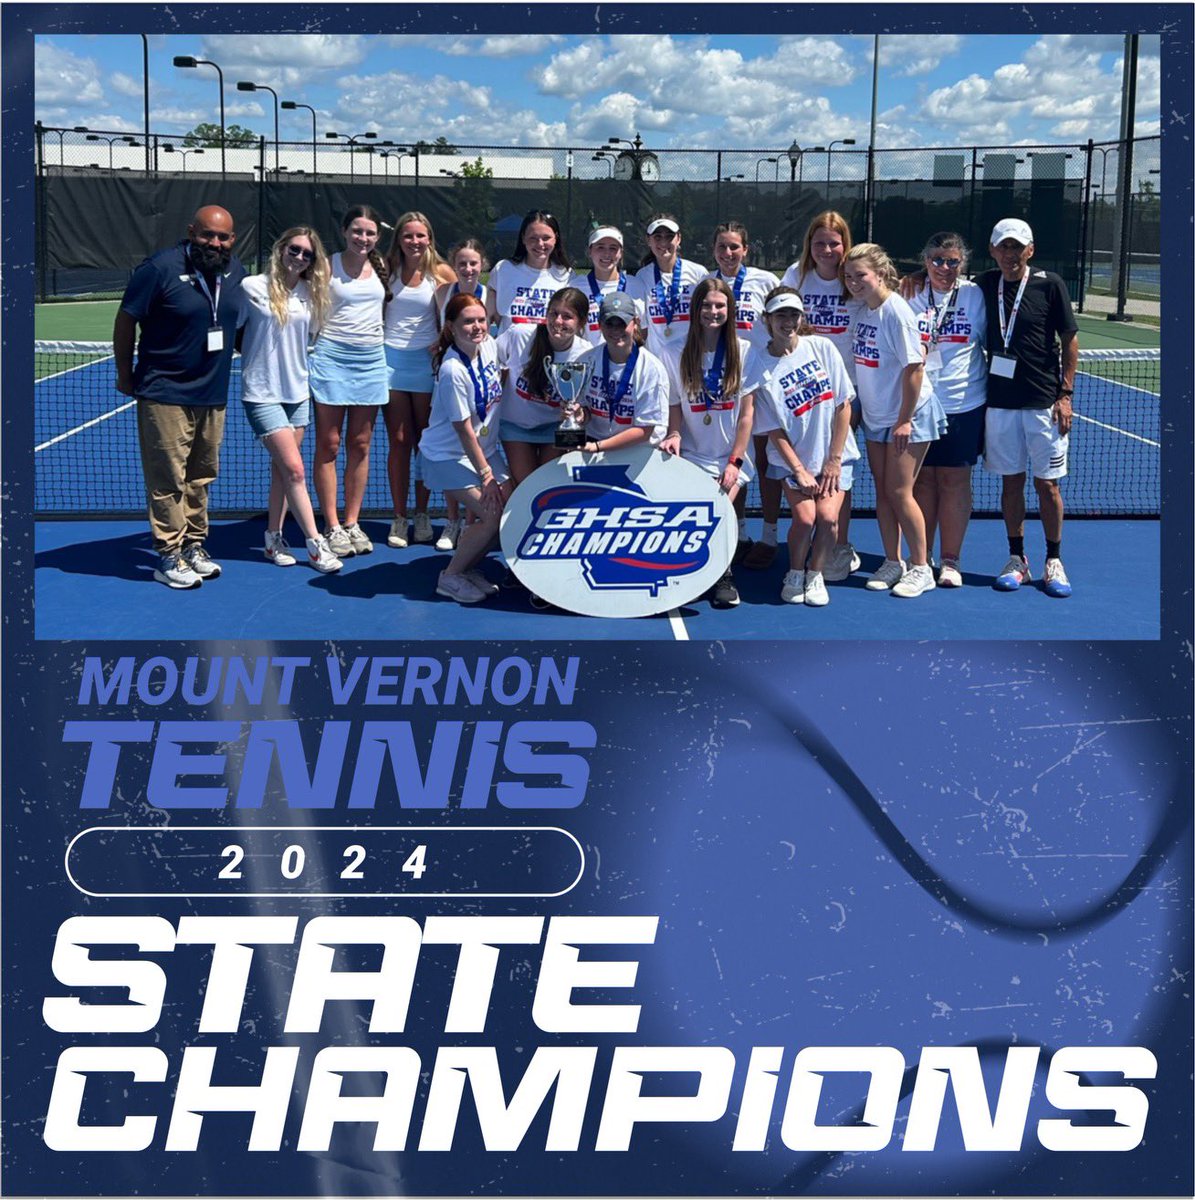 Introducing our Varsity Girls #MVtennis team as your 2024 @OfficialGHSA 1A-D1 State Champions! #MVathletics #ImAMustang @TheMVSchool